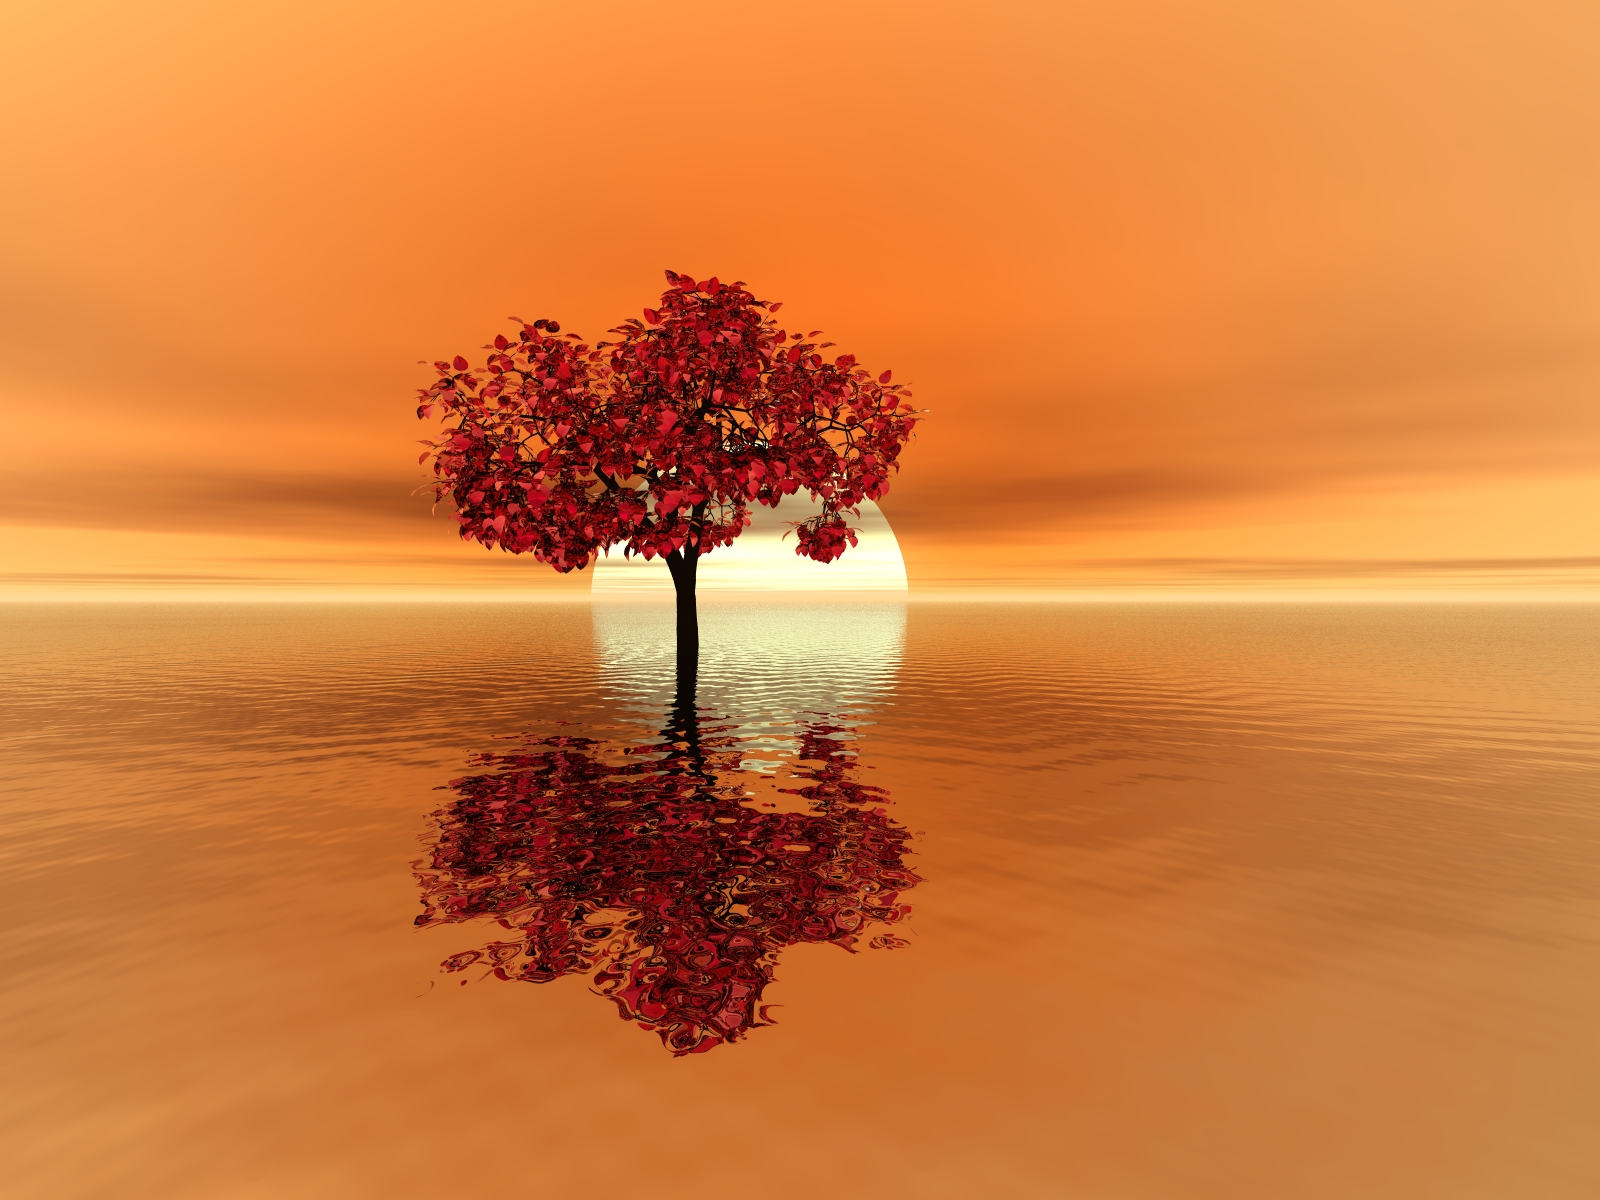 tree of life wallpaper,nature,tree,sky,natural landscape,calm